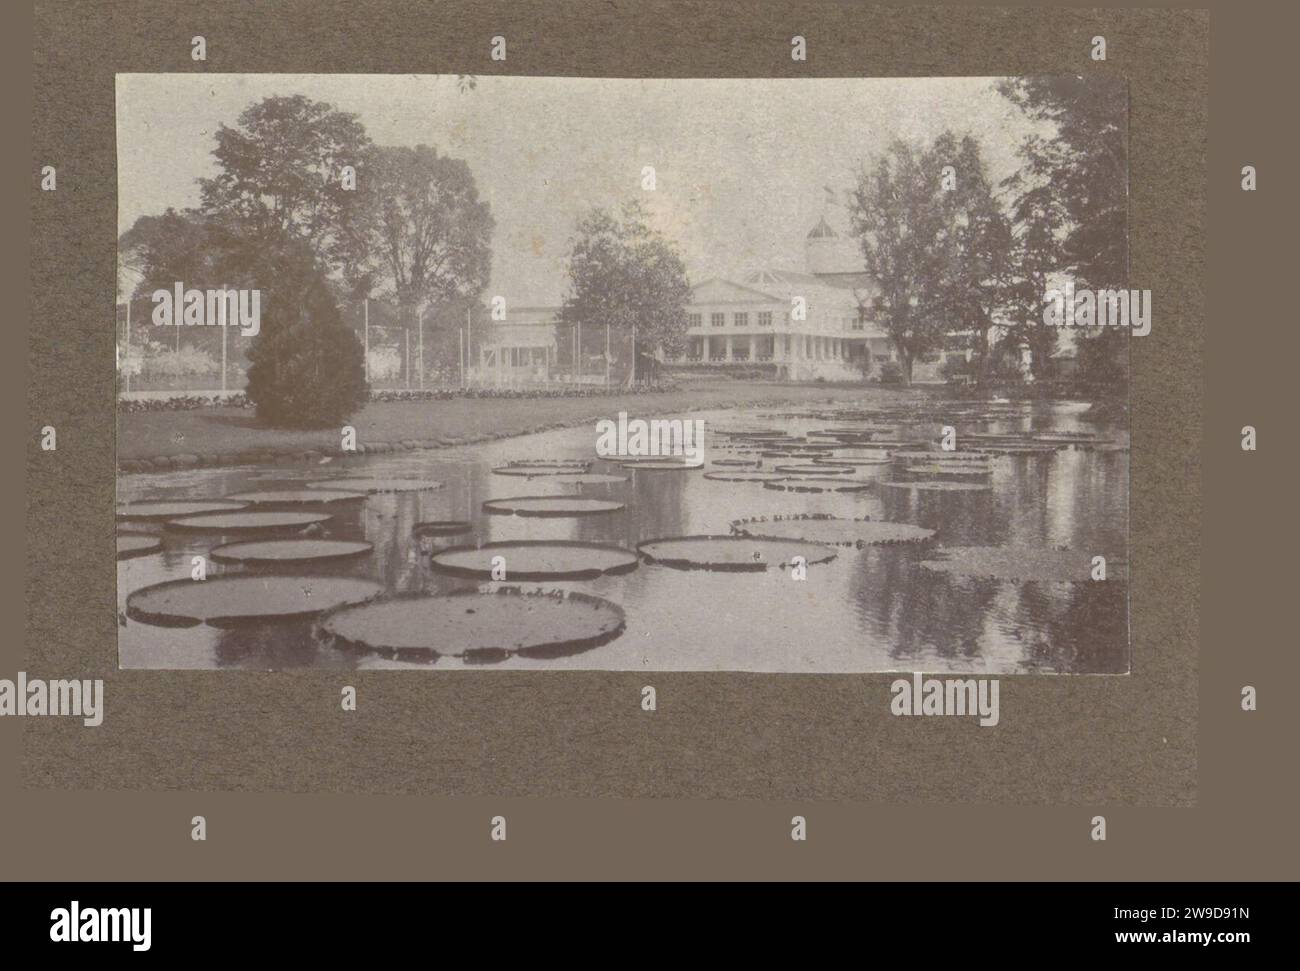 Pond in the country's botanical garden in Buitenzorg, c. 1920 - c. 1930 photograph Part of photo album of the Kleiterp-Vermeulen family with recordings of the Dutch East Indies. Lands Bot Garden paper. photographic support  Botanic Garden, 'Hortus Botanicus'. Pound, Pool 's Lands Plantentuin. Dutch East Indies, The Stock Photo